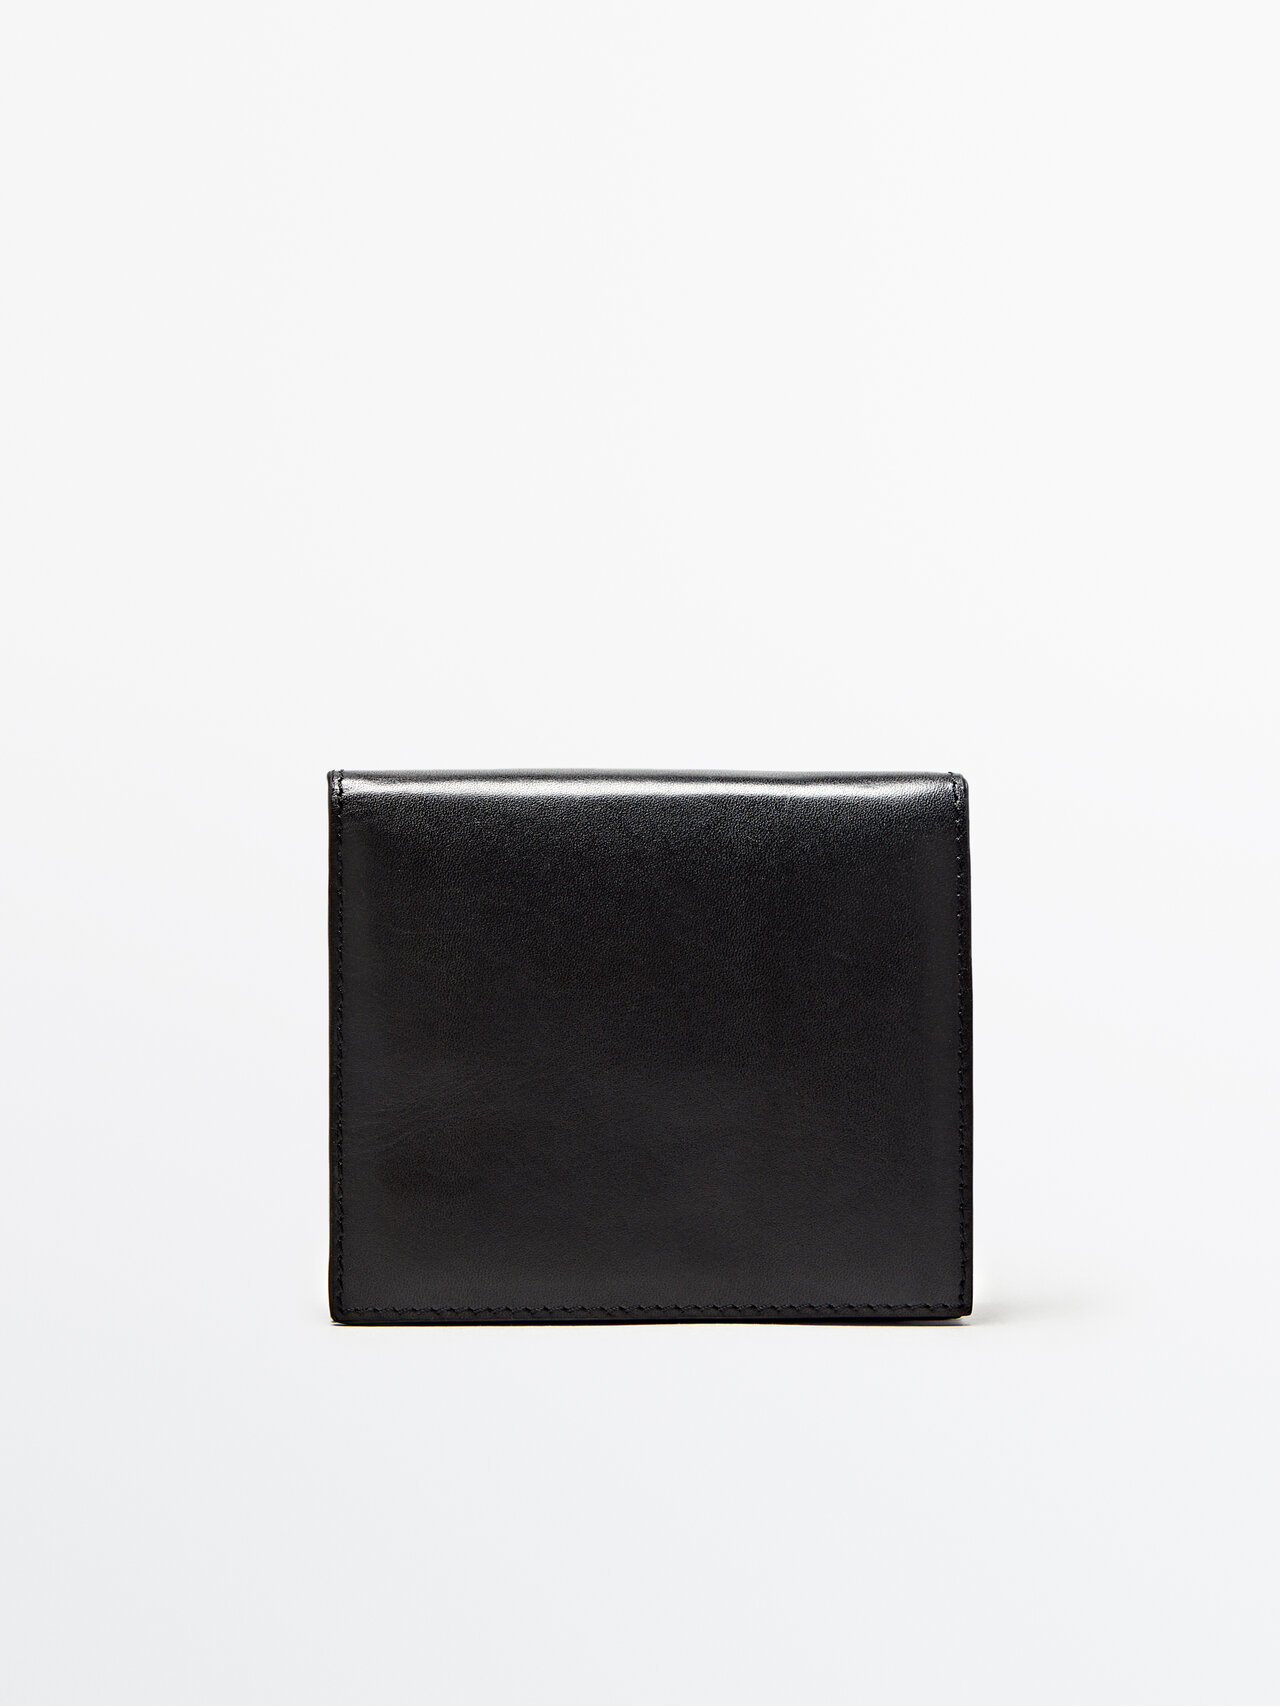 Massimo Dutti Nappa Leather Wallet In Brown